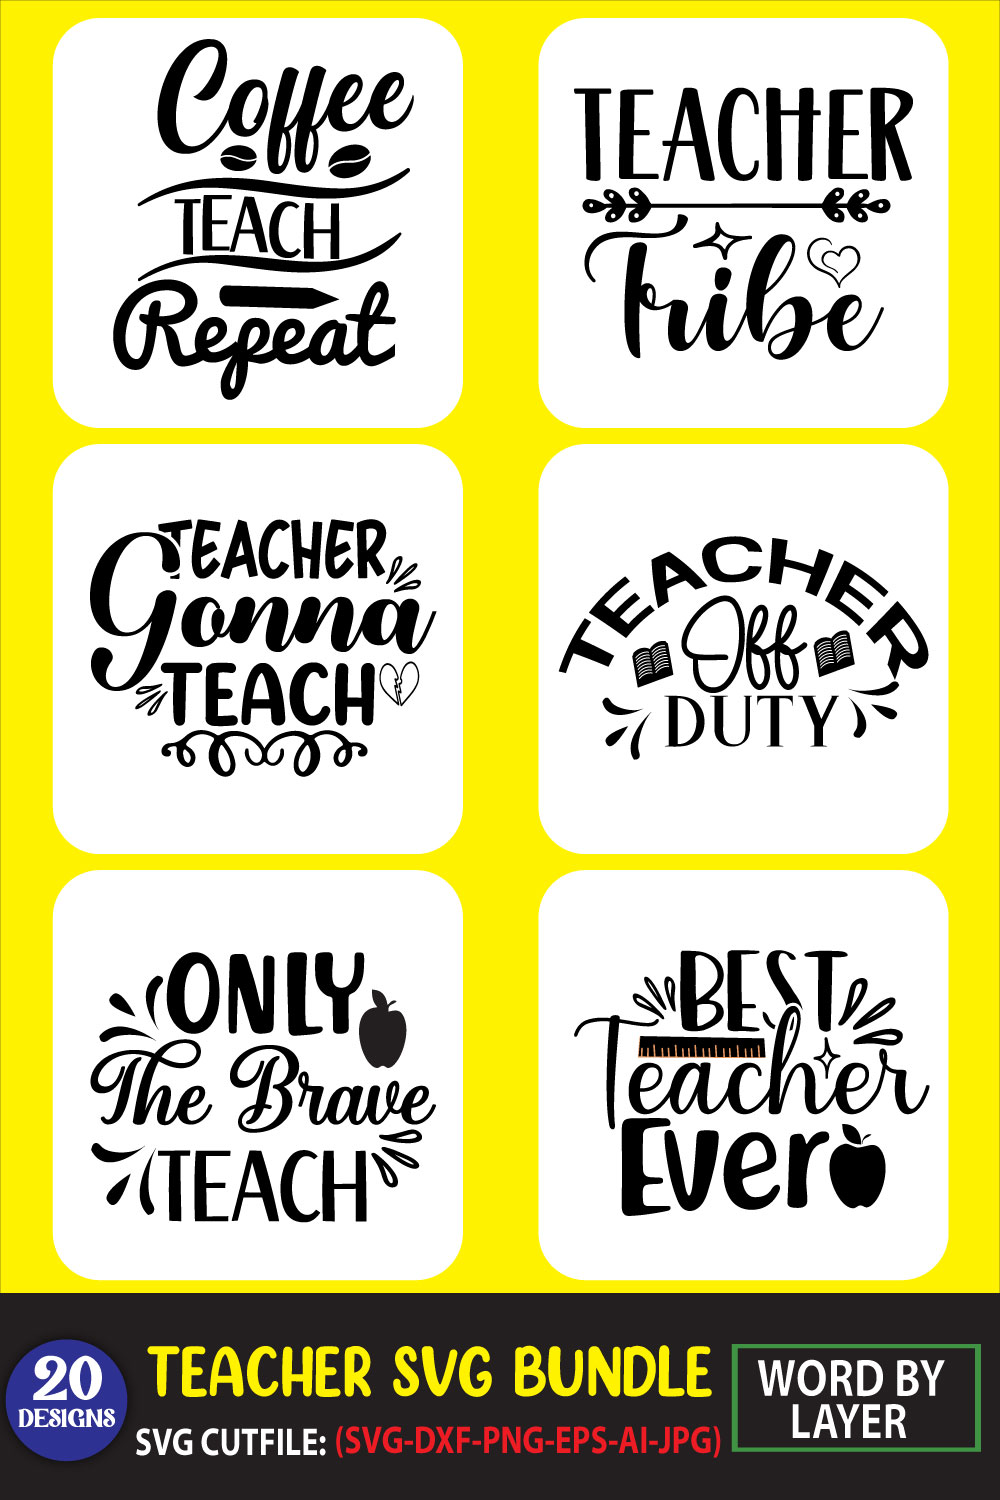 Bundle of amazing images for teacher-themed prints